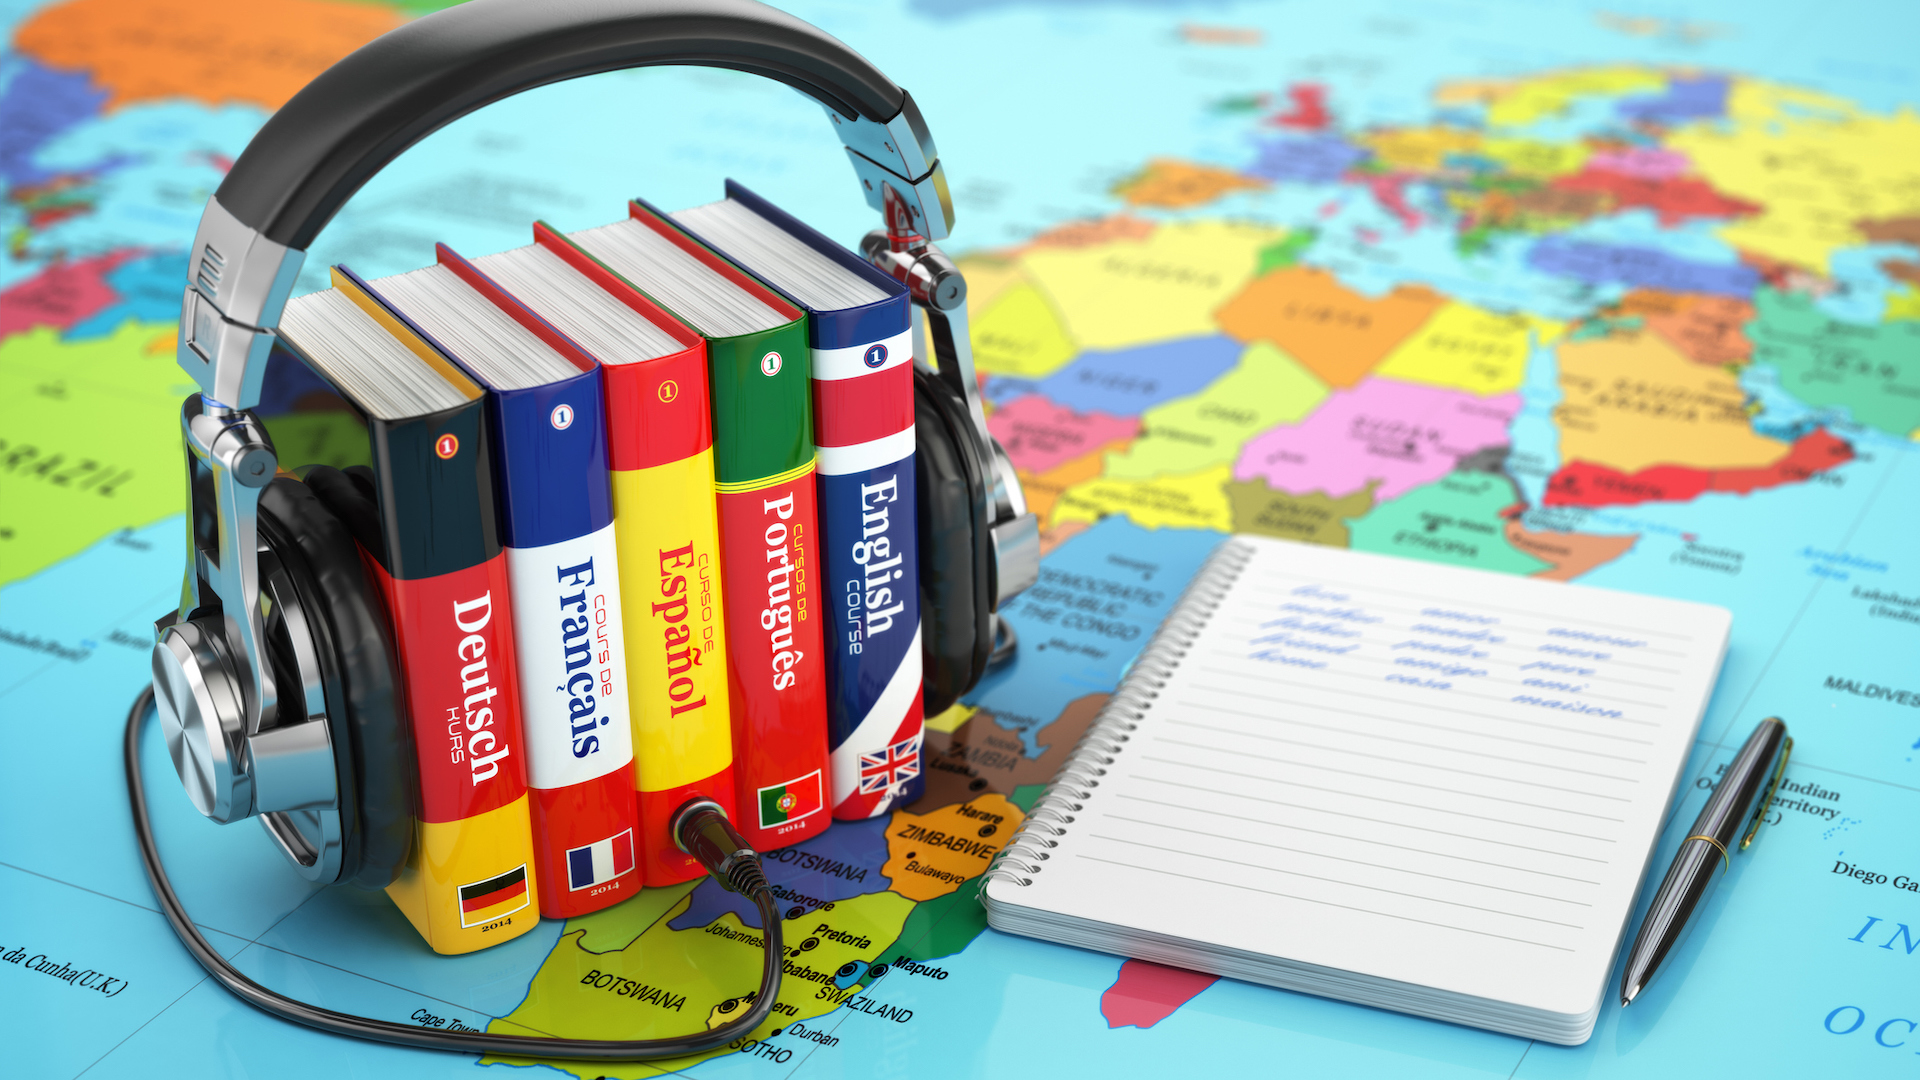 A set of language dictionaries and pair of headphones